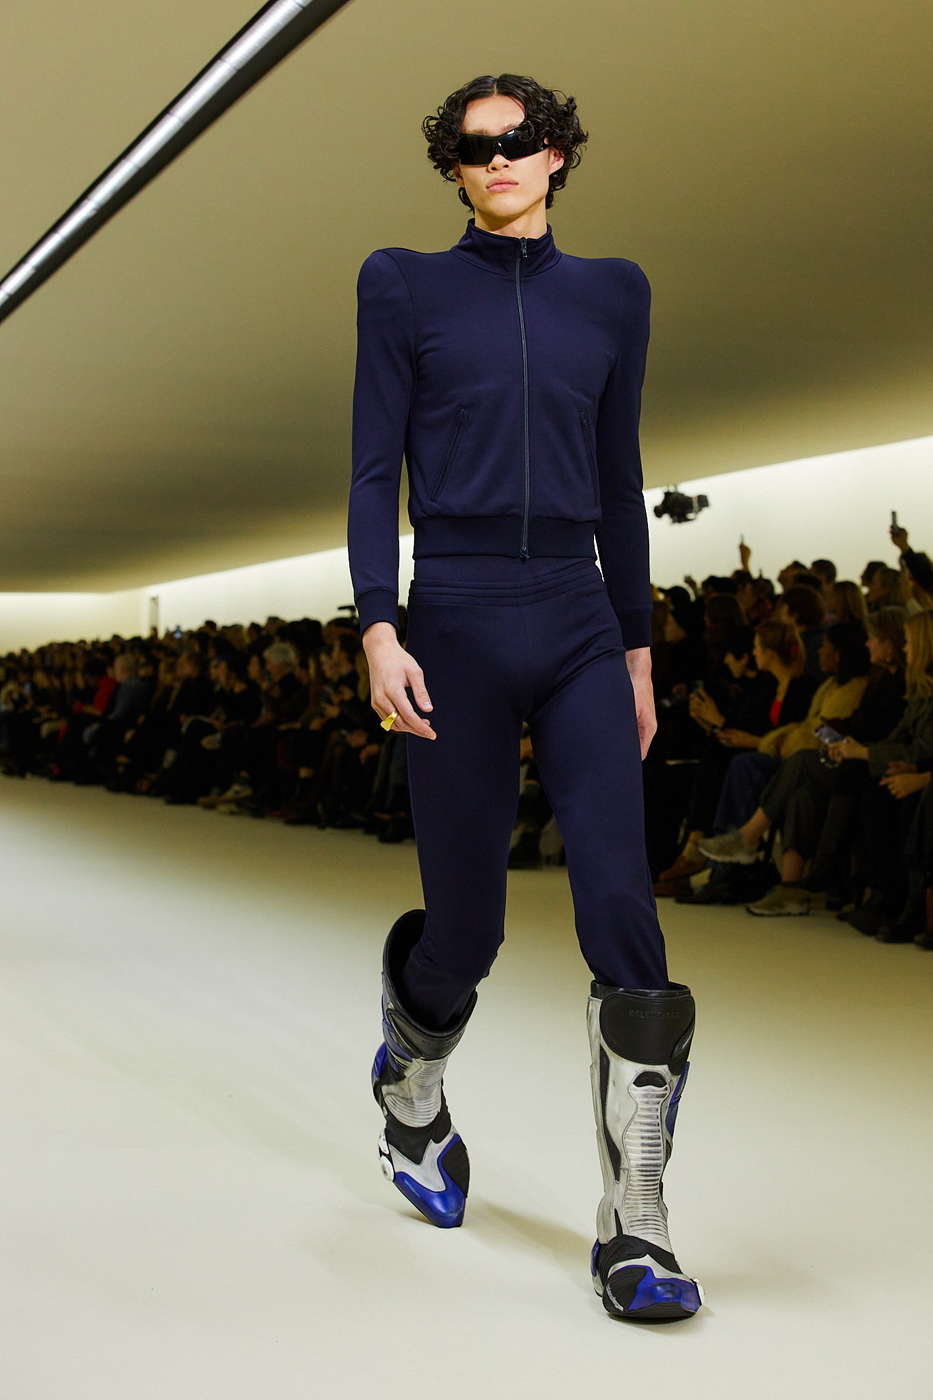 Balenciaga Returns With FW23 Show, For Better or Worse